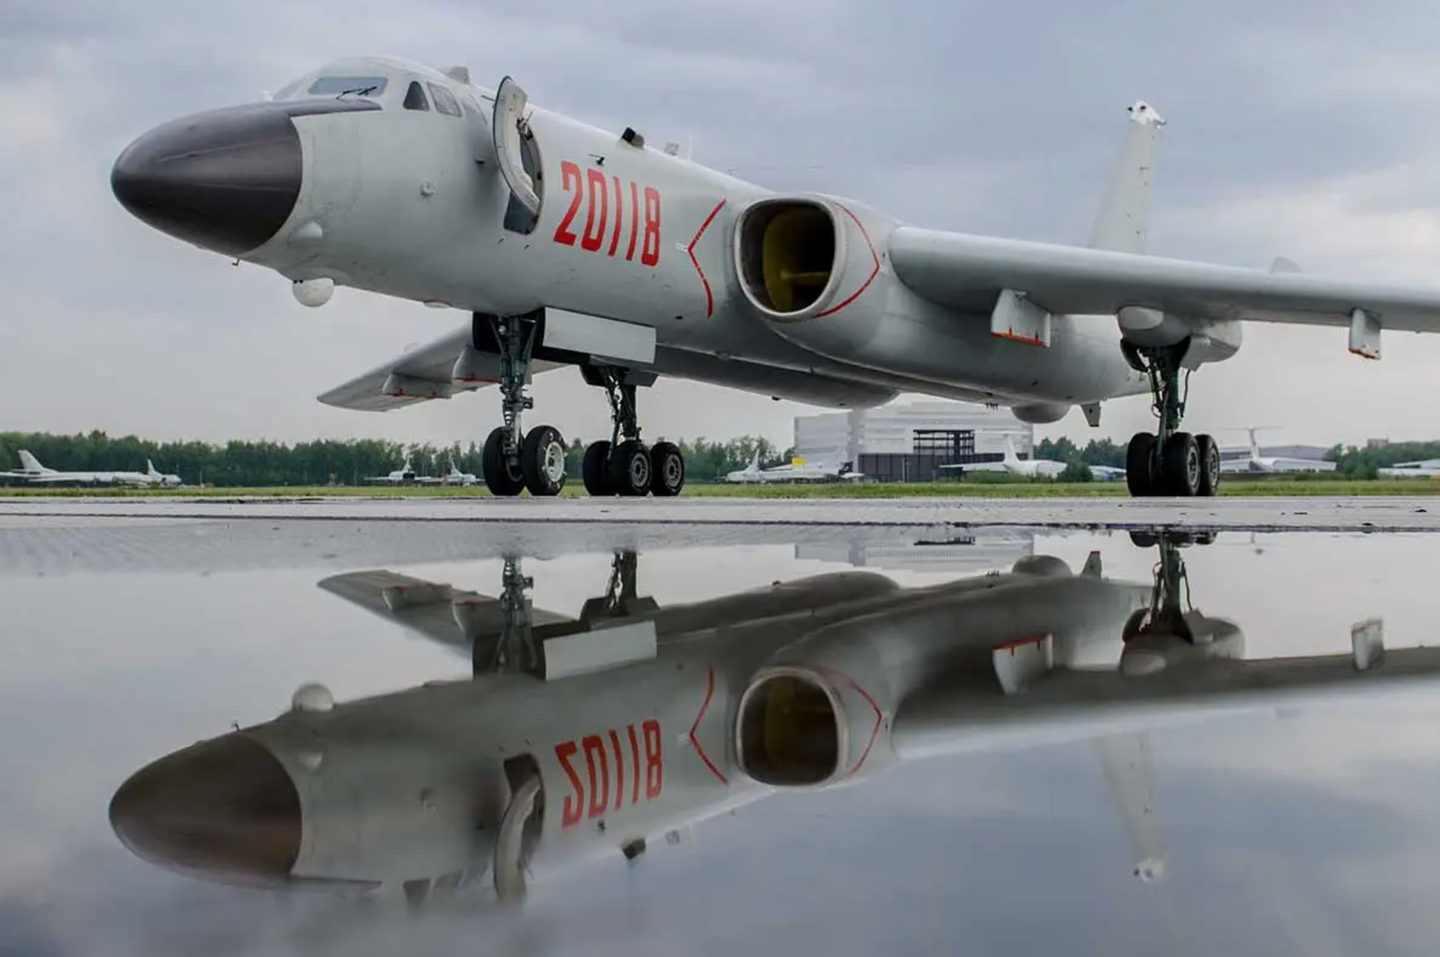 A PLAAF H-6K bomber takes part in a joint exercise with the Russian Aerospace Forces in 2018.&nbsp;<em>Ministry of Defense of the Russian Federation</em>